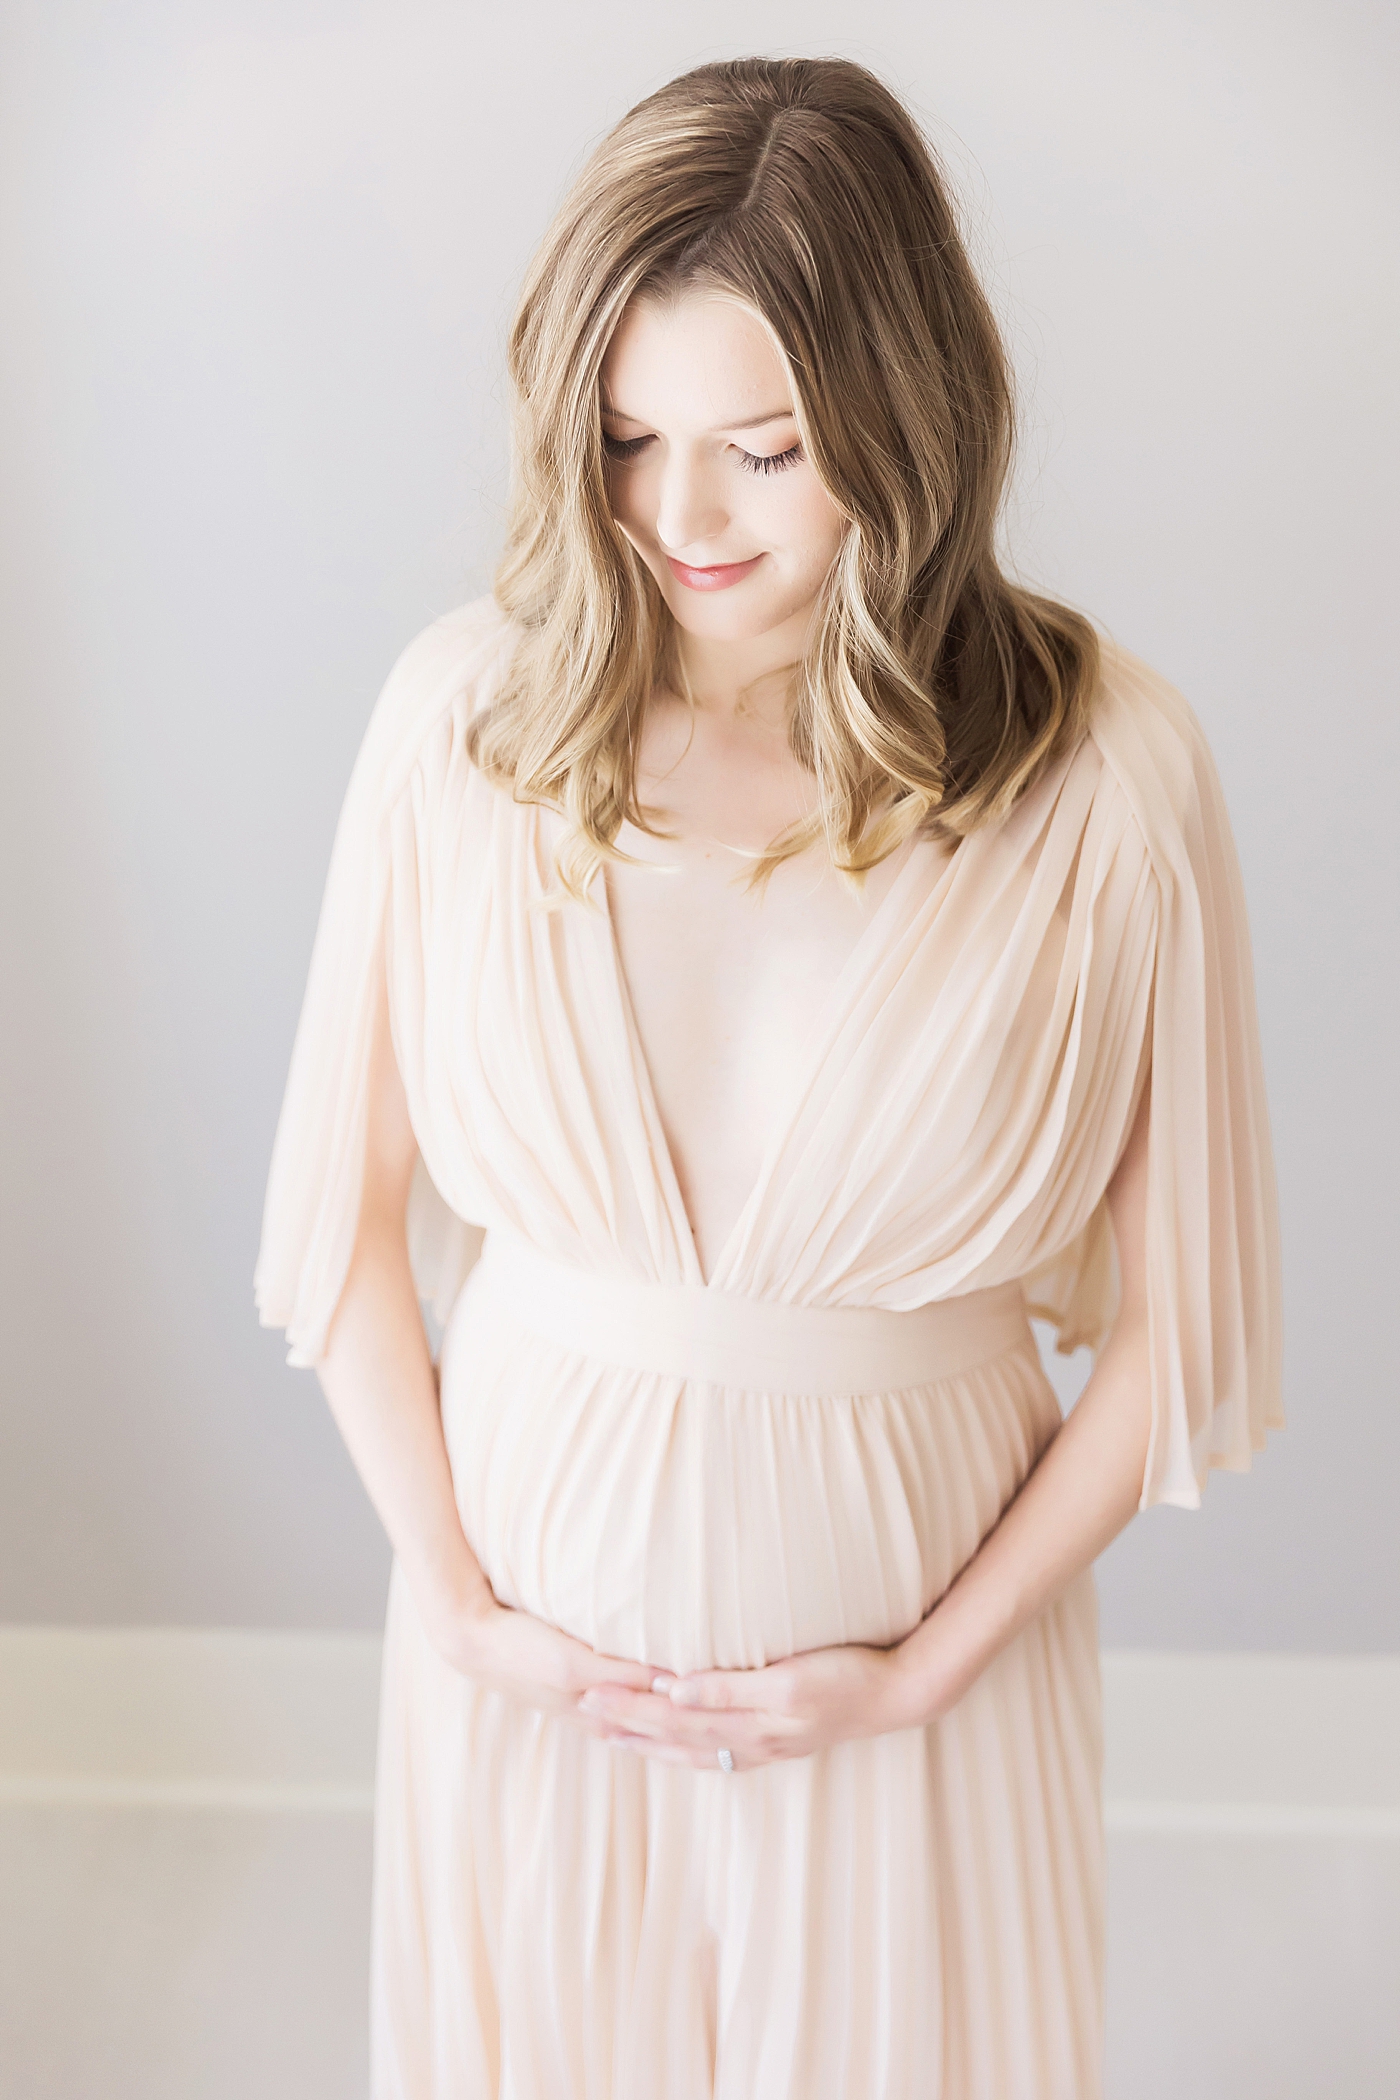 Expecting mom in beautiful dress holding her belly. Photo by Fresh Light Photography.